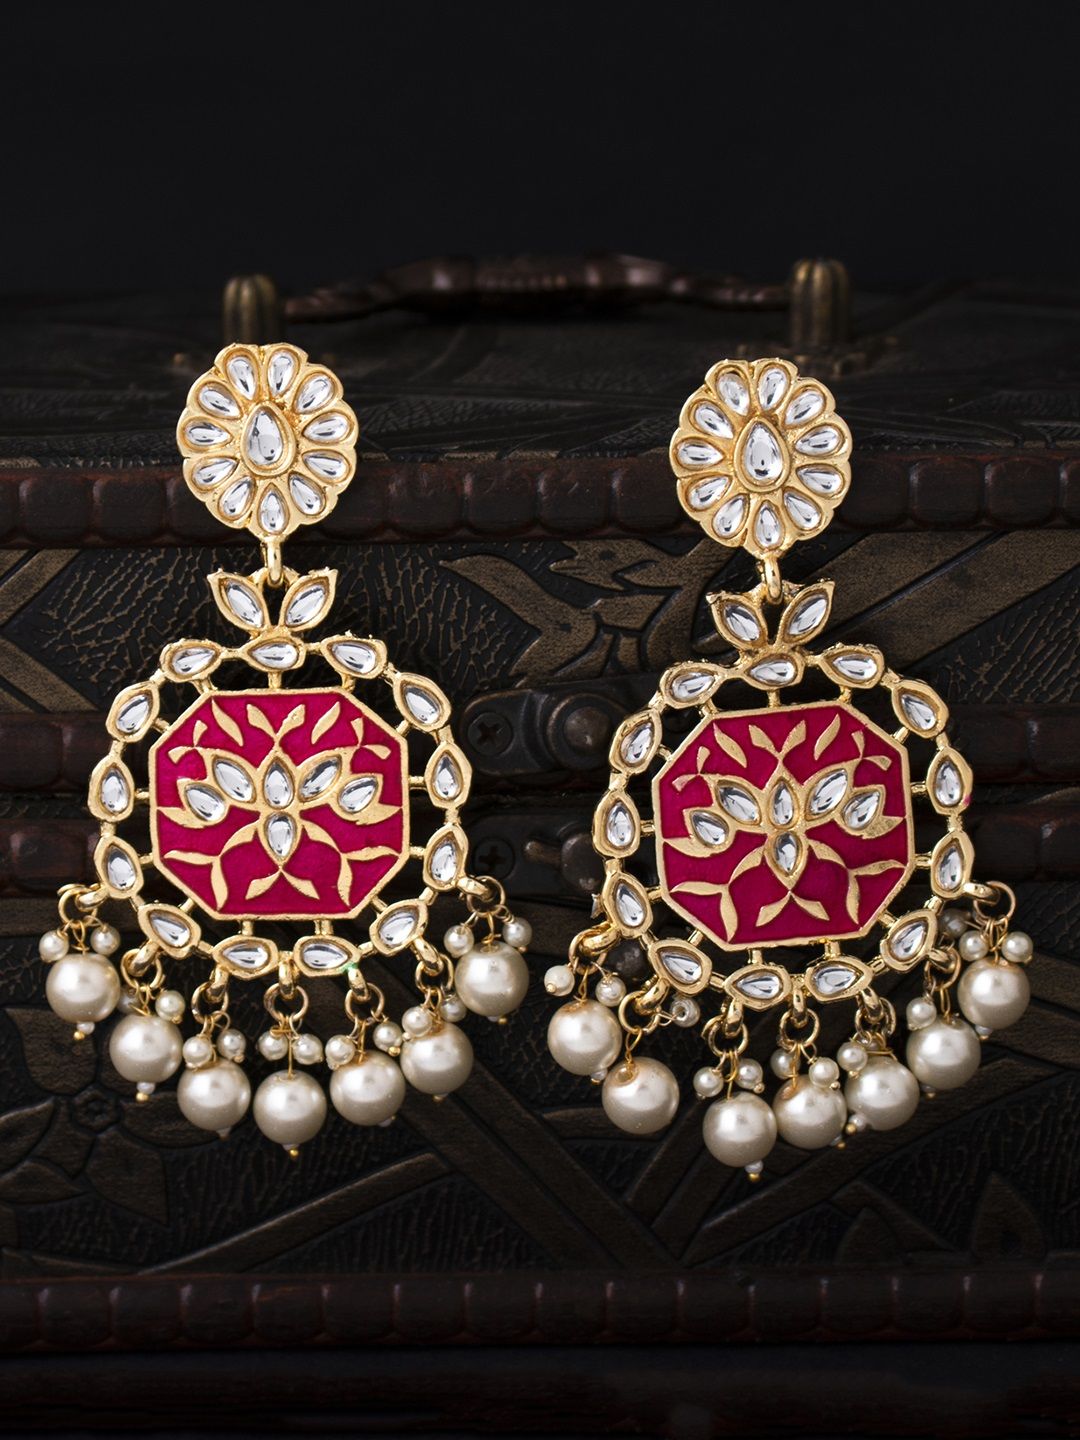 Sukkhi Gold-Plated Crescent Shaped Chandbalis Price in India